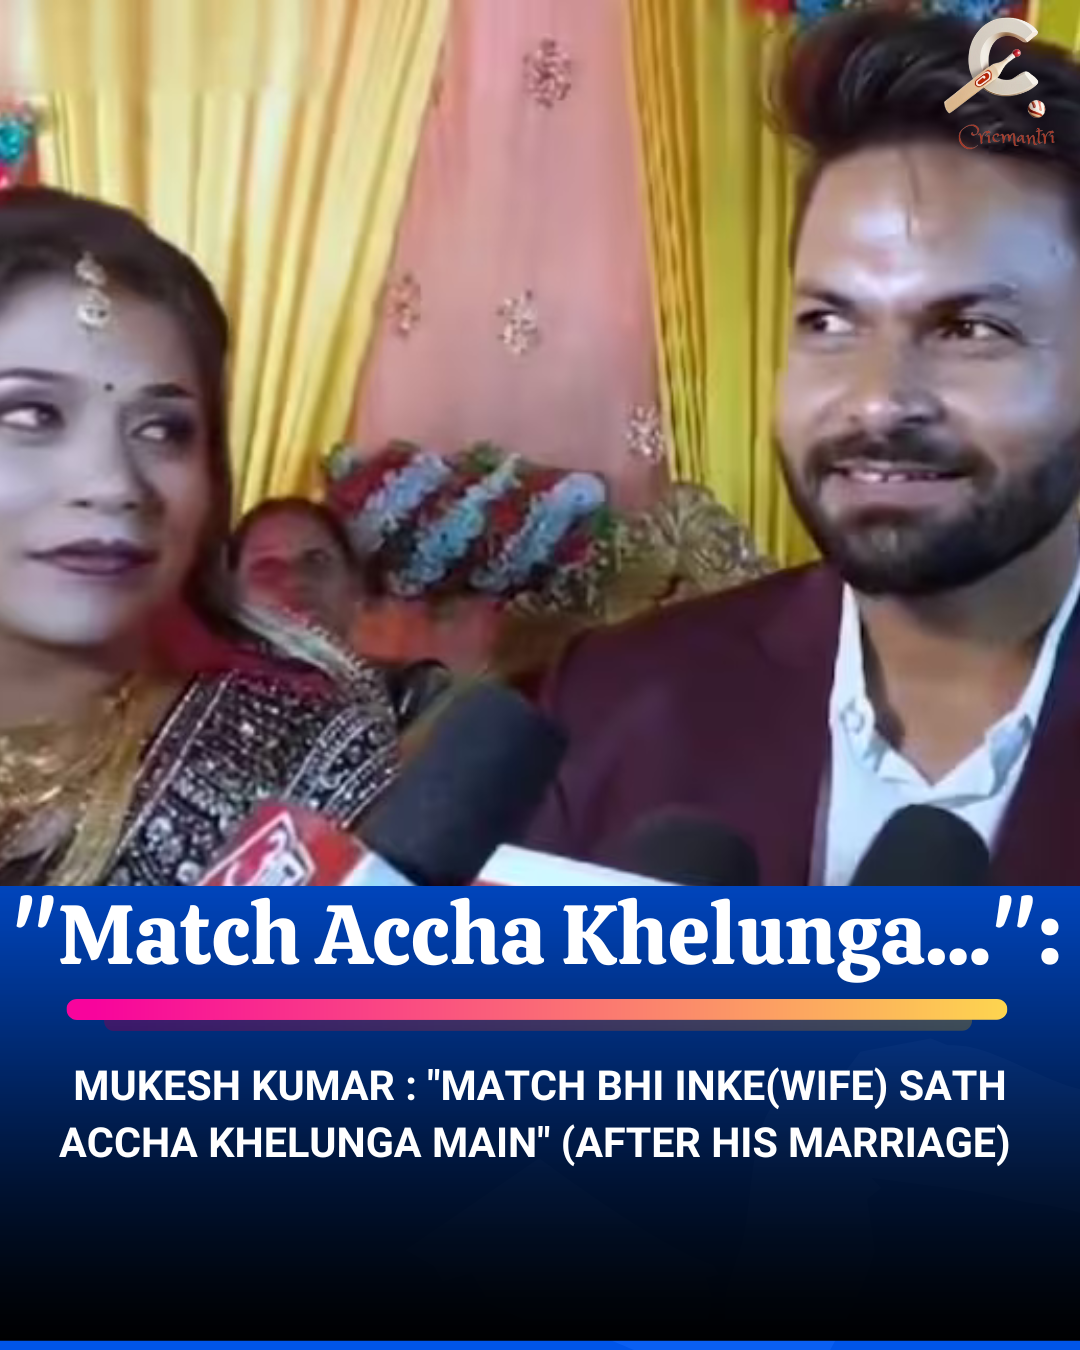 Indian Cricketer Mukesh Kumar's Hilarious Post-Wedding Comment Goes Viral